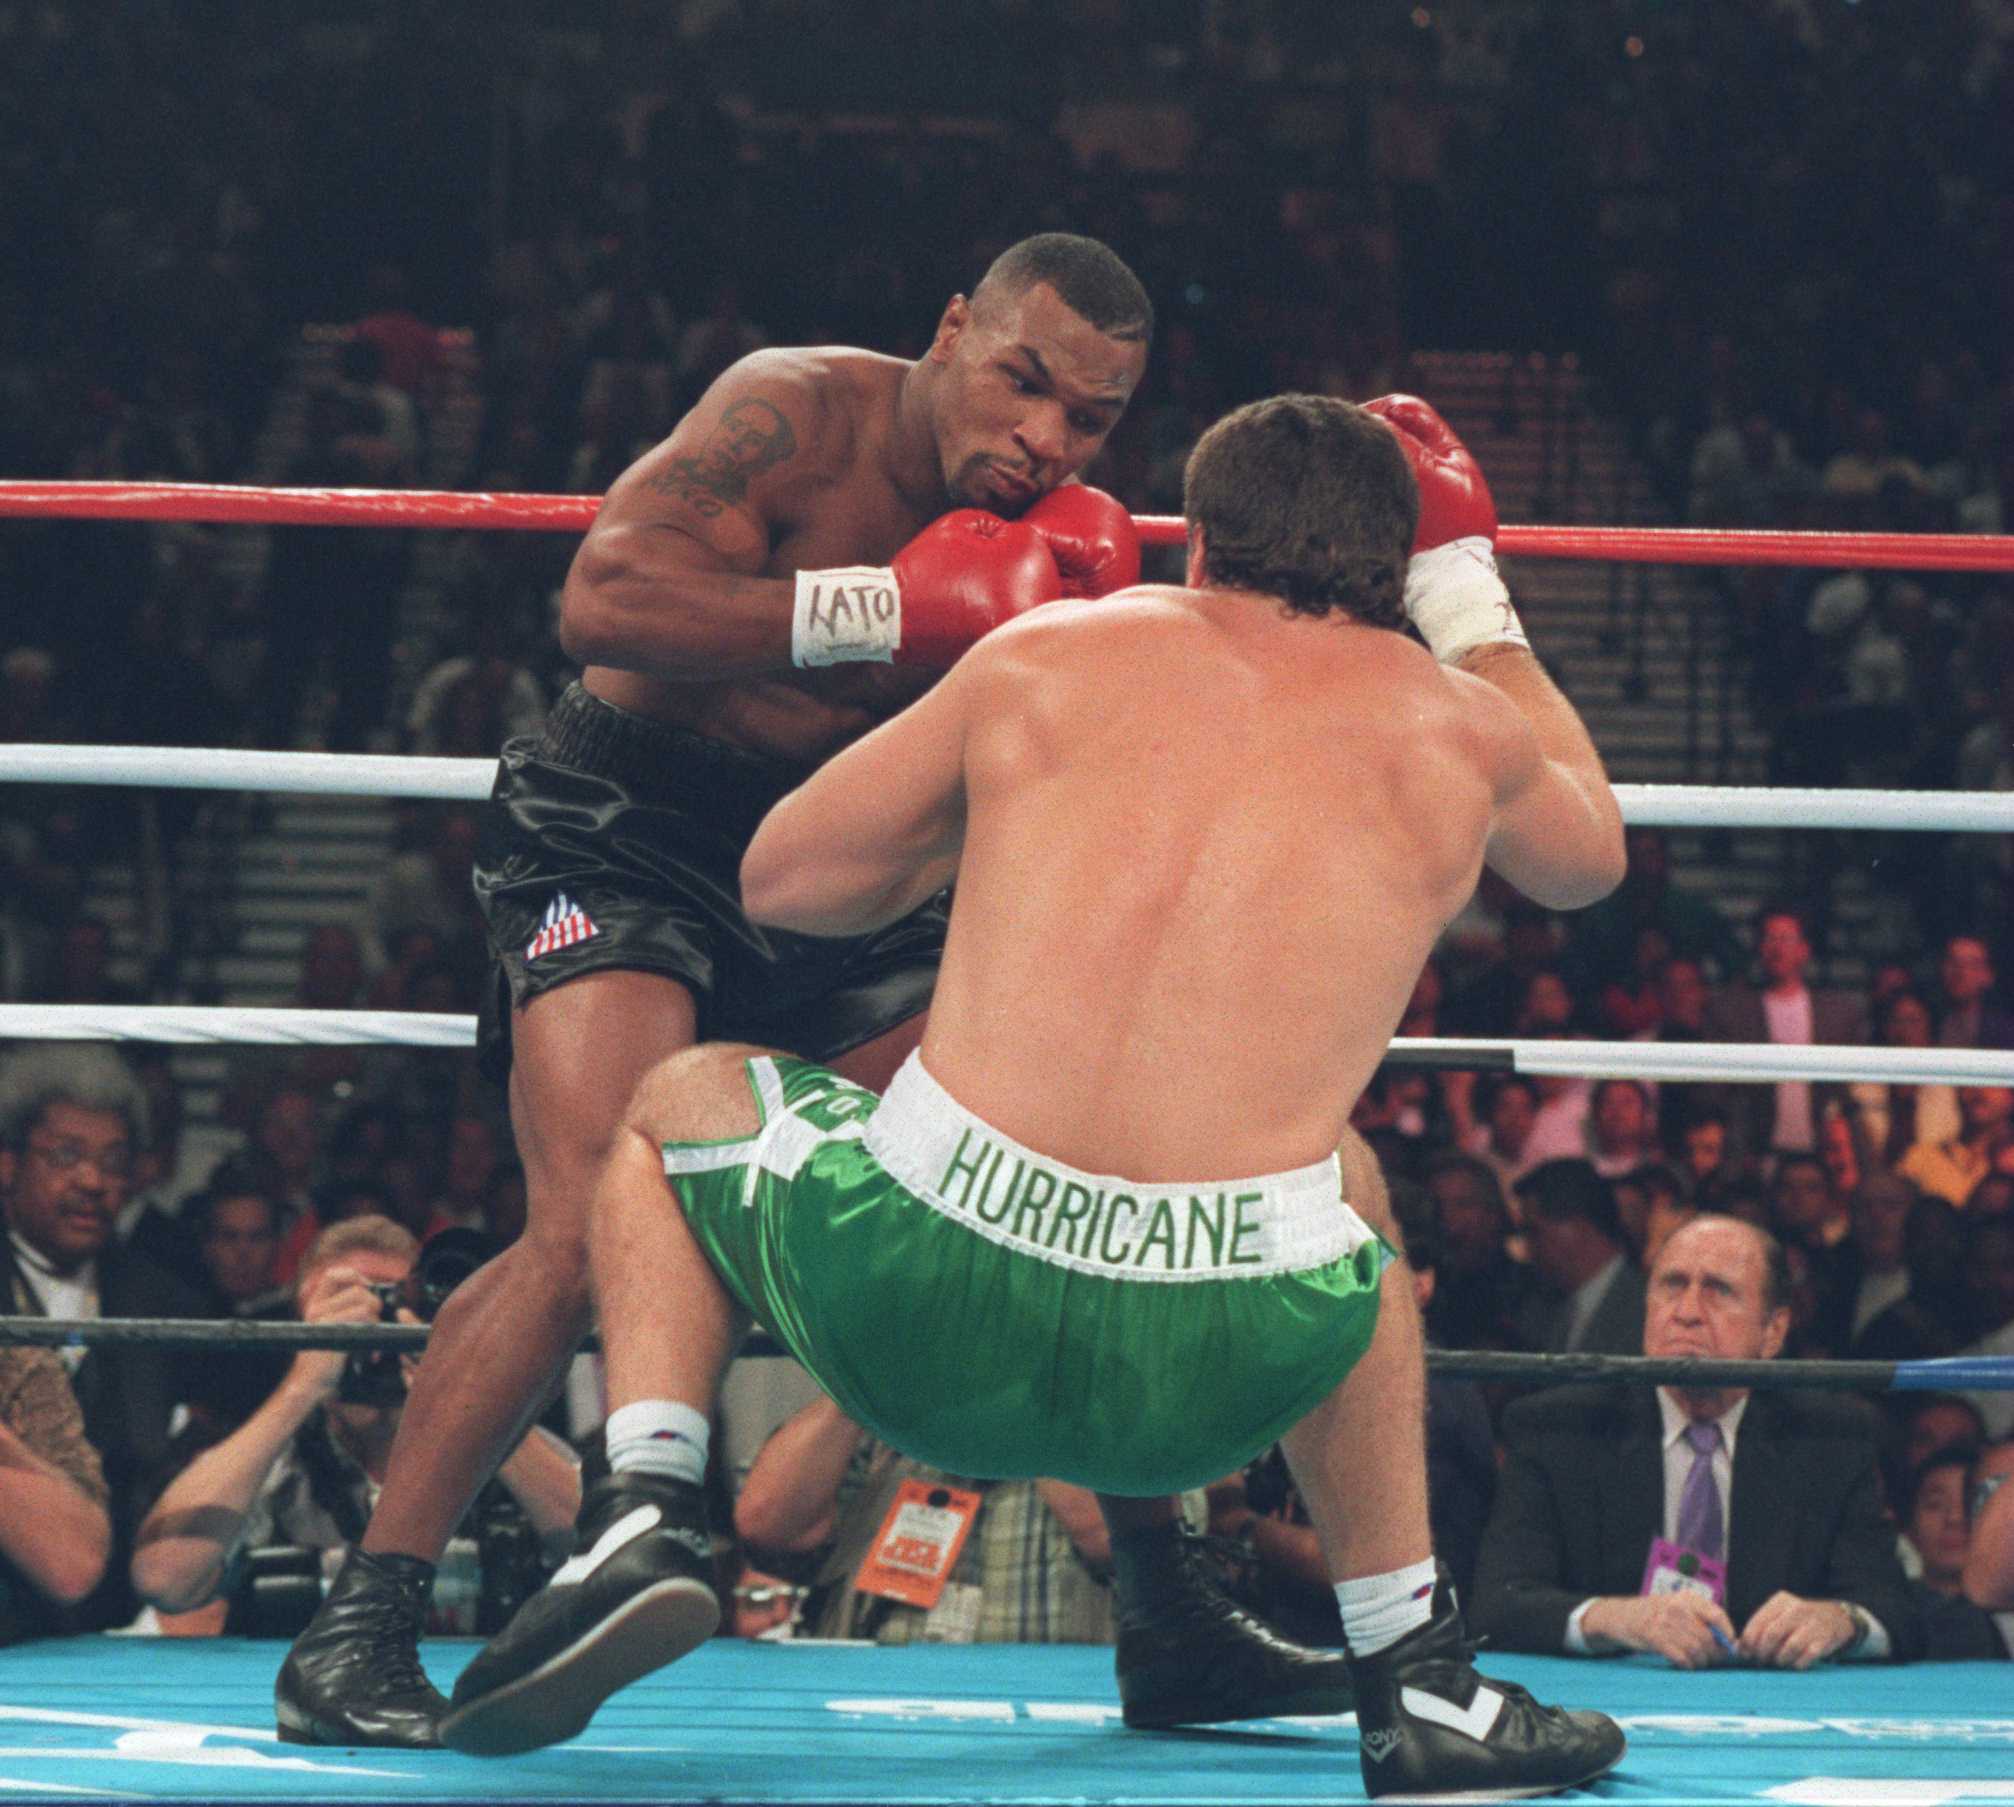 19 AUG 1995:  MIKE TYSON KNOCKS OPPONENT PETE MCNEELEY TO THE CANVAS DURING TYSON''S COMEBACK FIGHT AT THE MGM GRAND GARDEN IN LAS VEGAS, NEVADA.  TYSON WAS DECLARED THE WINNER AFTER MCNEELEY''S CORNER STOPPED THE FIGHT AT 1:29 OF THE FIRST ROUND. Mandato